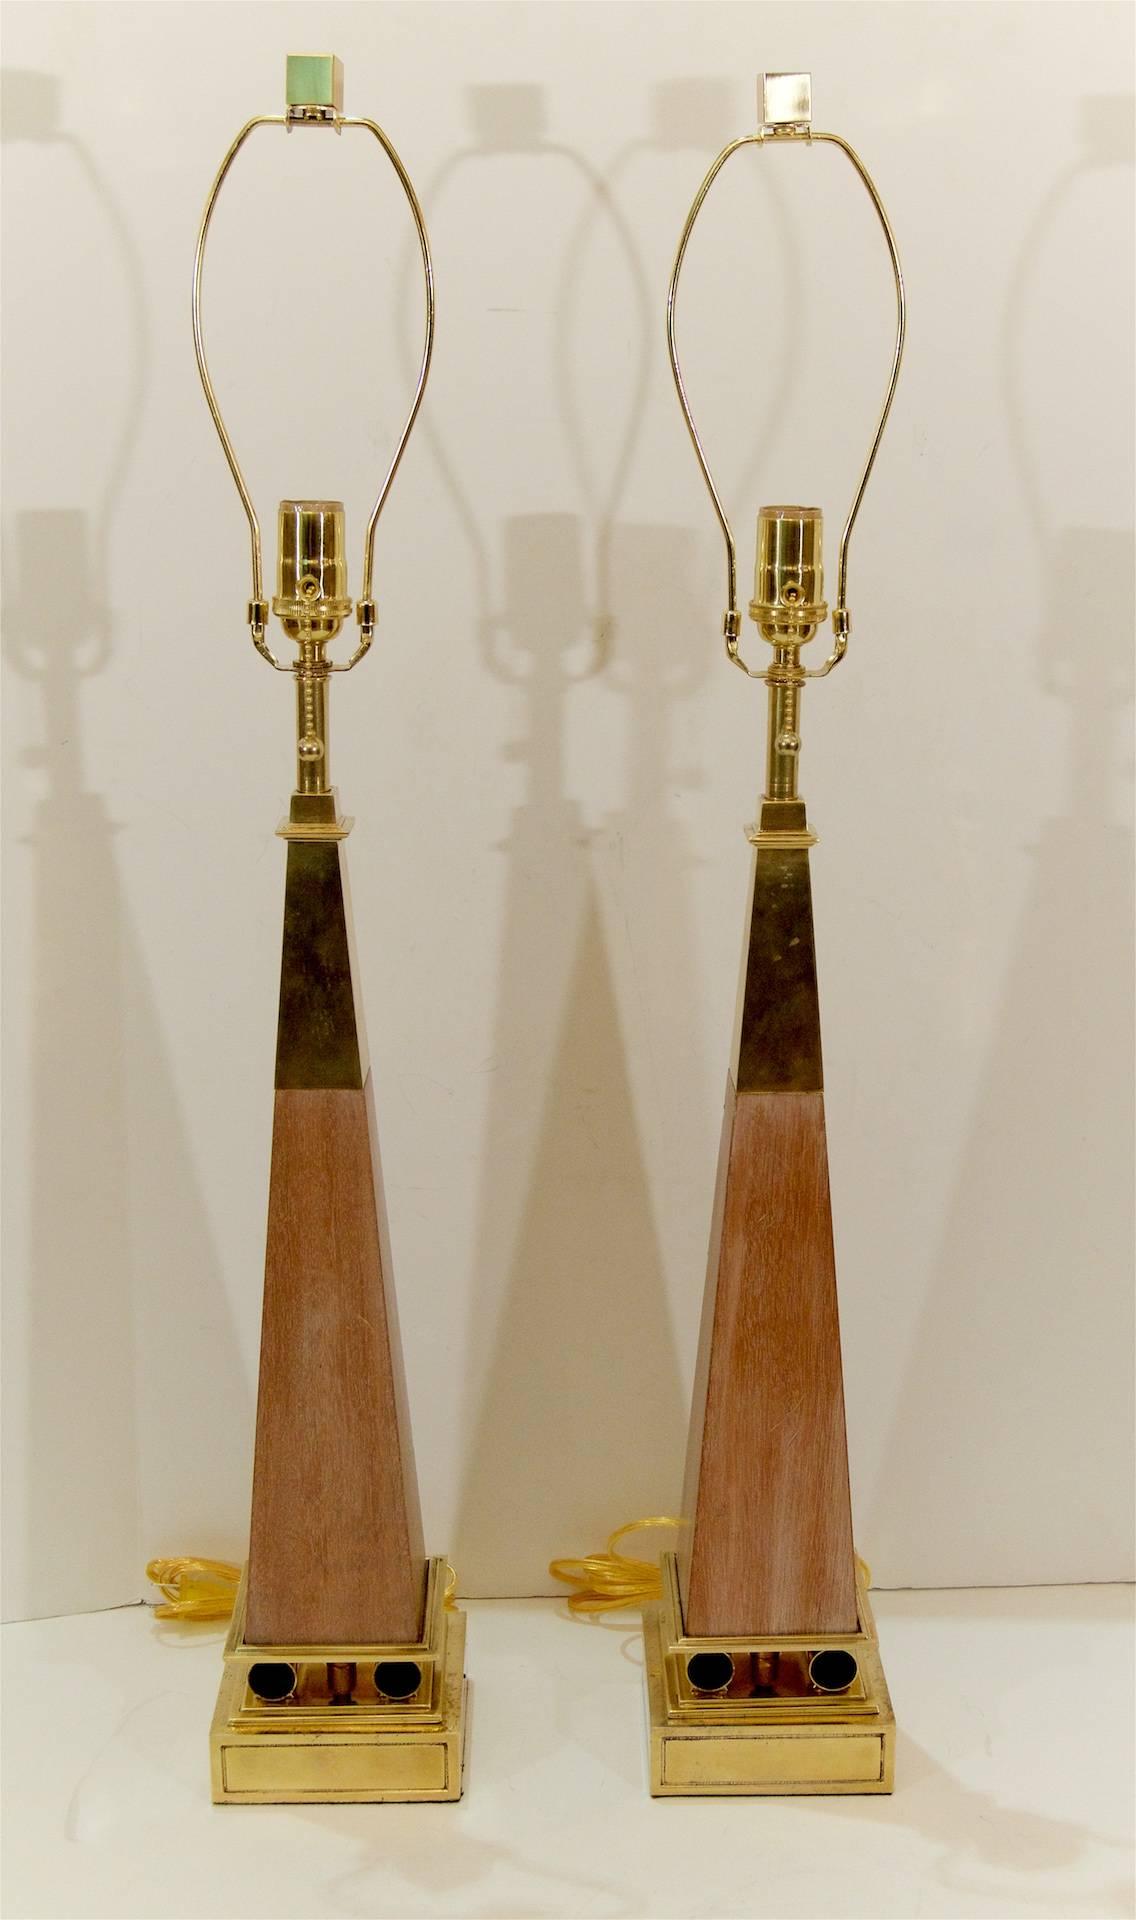 Wood Obelisk form table lamps with brass accents attributed to Tony Parzinger, manufactured by Stiffel Lamps.

Each lamp takes one medium base bulb up to 150 watts per bulb. New wiring. Height listed is to the top of the harp, pictured with an 10